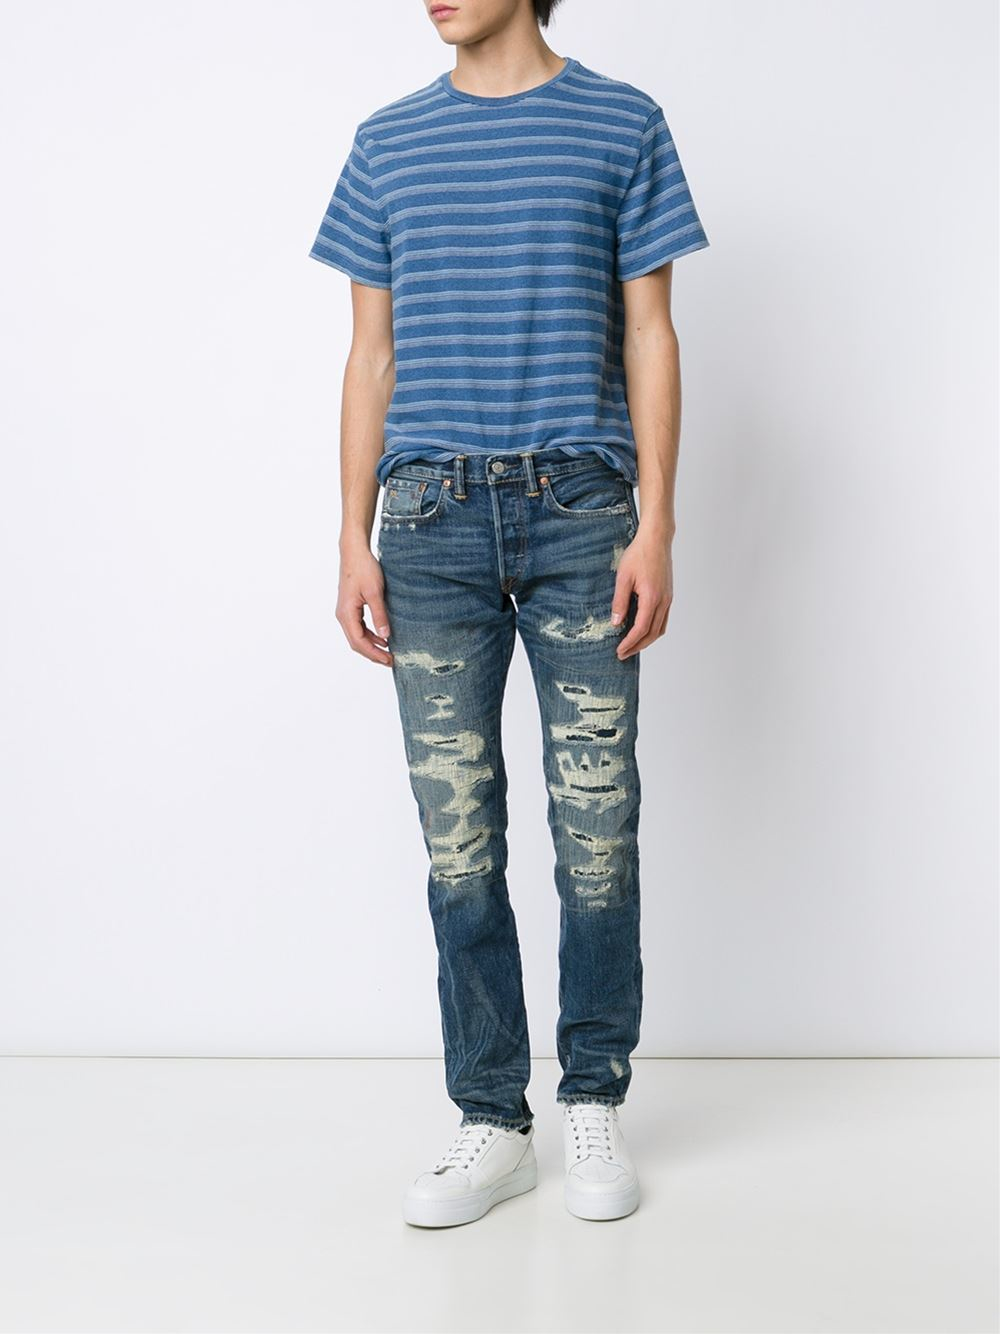 RRL Cotton Striped T-shirt in Blue for Men - Lyst